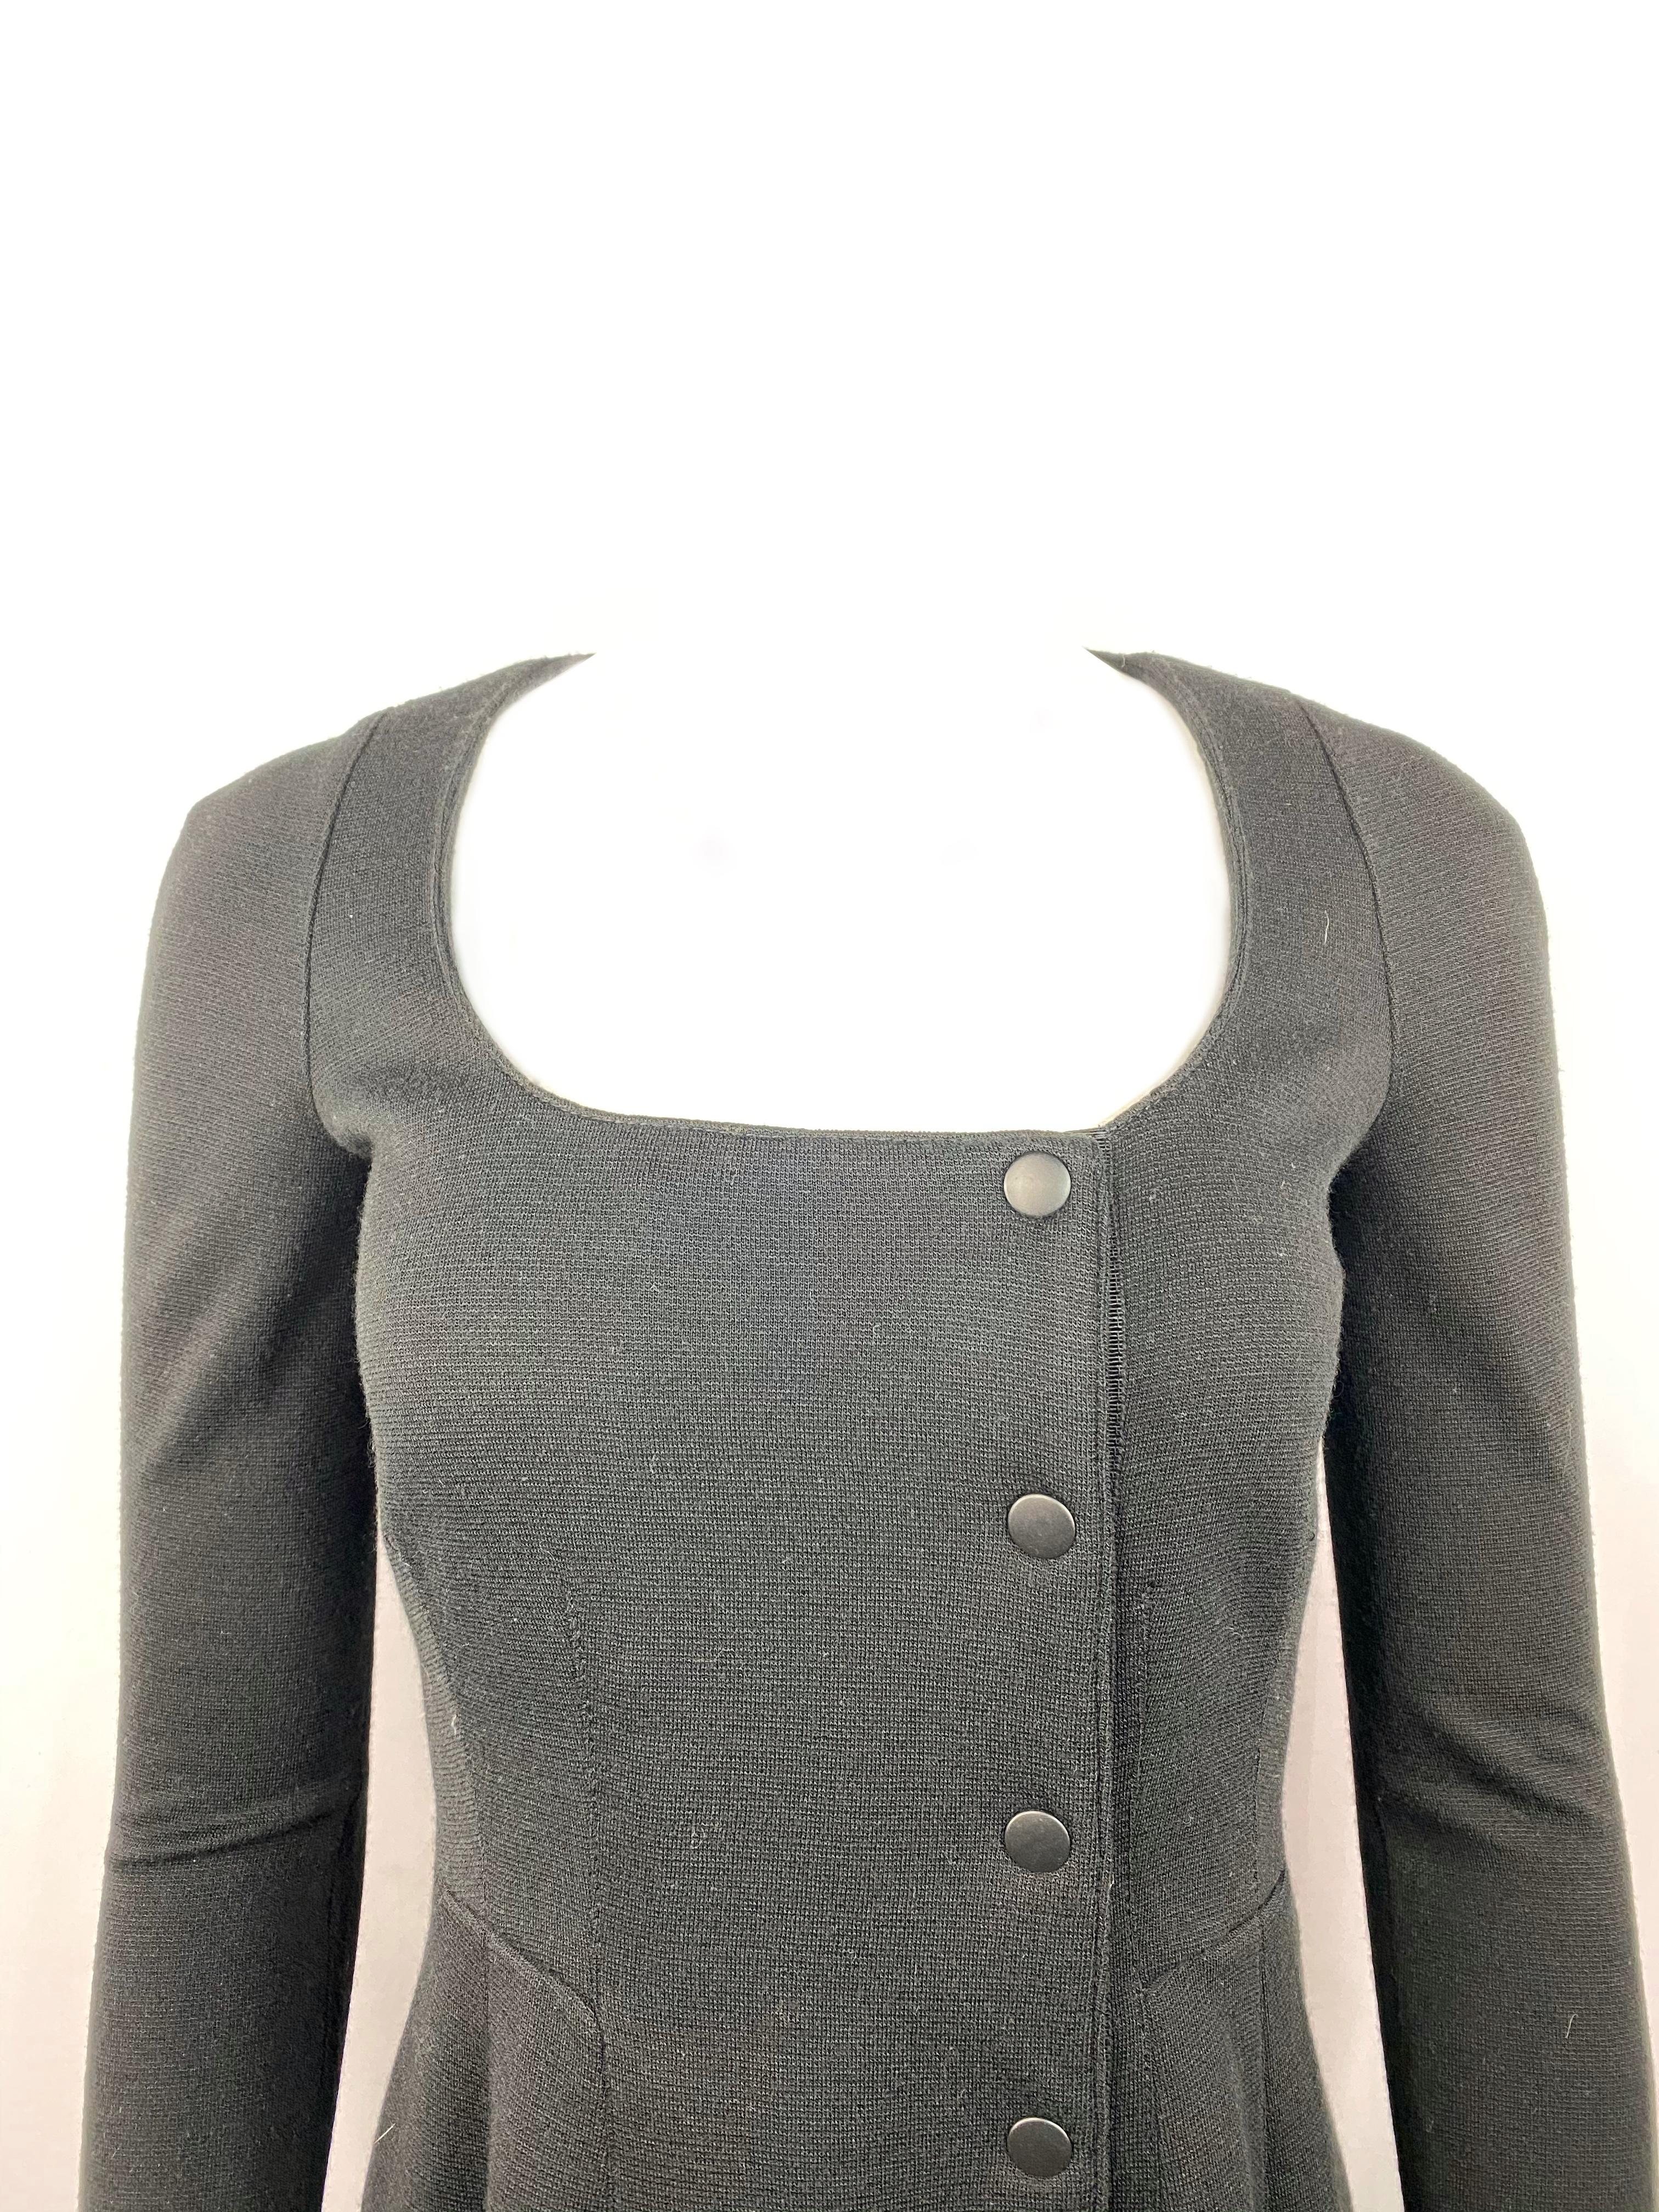 Proenza Schouler Black Wool Mini Dress w/ Buttons Size 4

Product details:
Size 4
100% wool
Long sleeves
Mini length 
Featuring eight front buttons closure and four buttons on the bottom of each sleeve
Made in Italy
